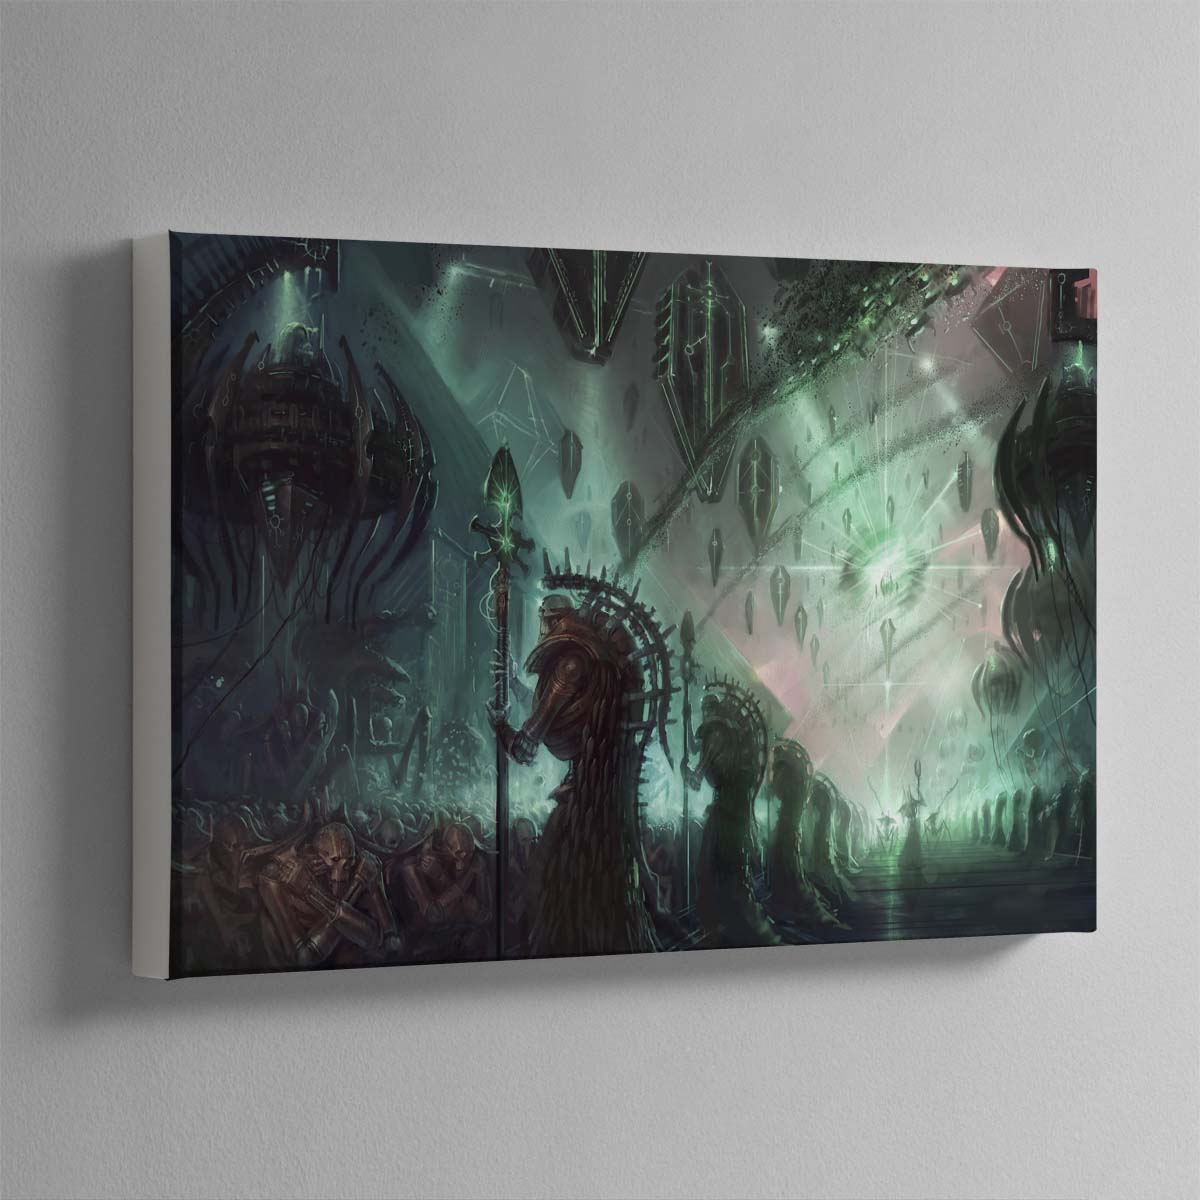 The Silent King Arrives – Canvas